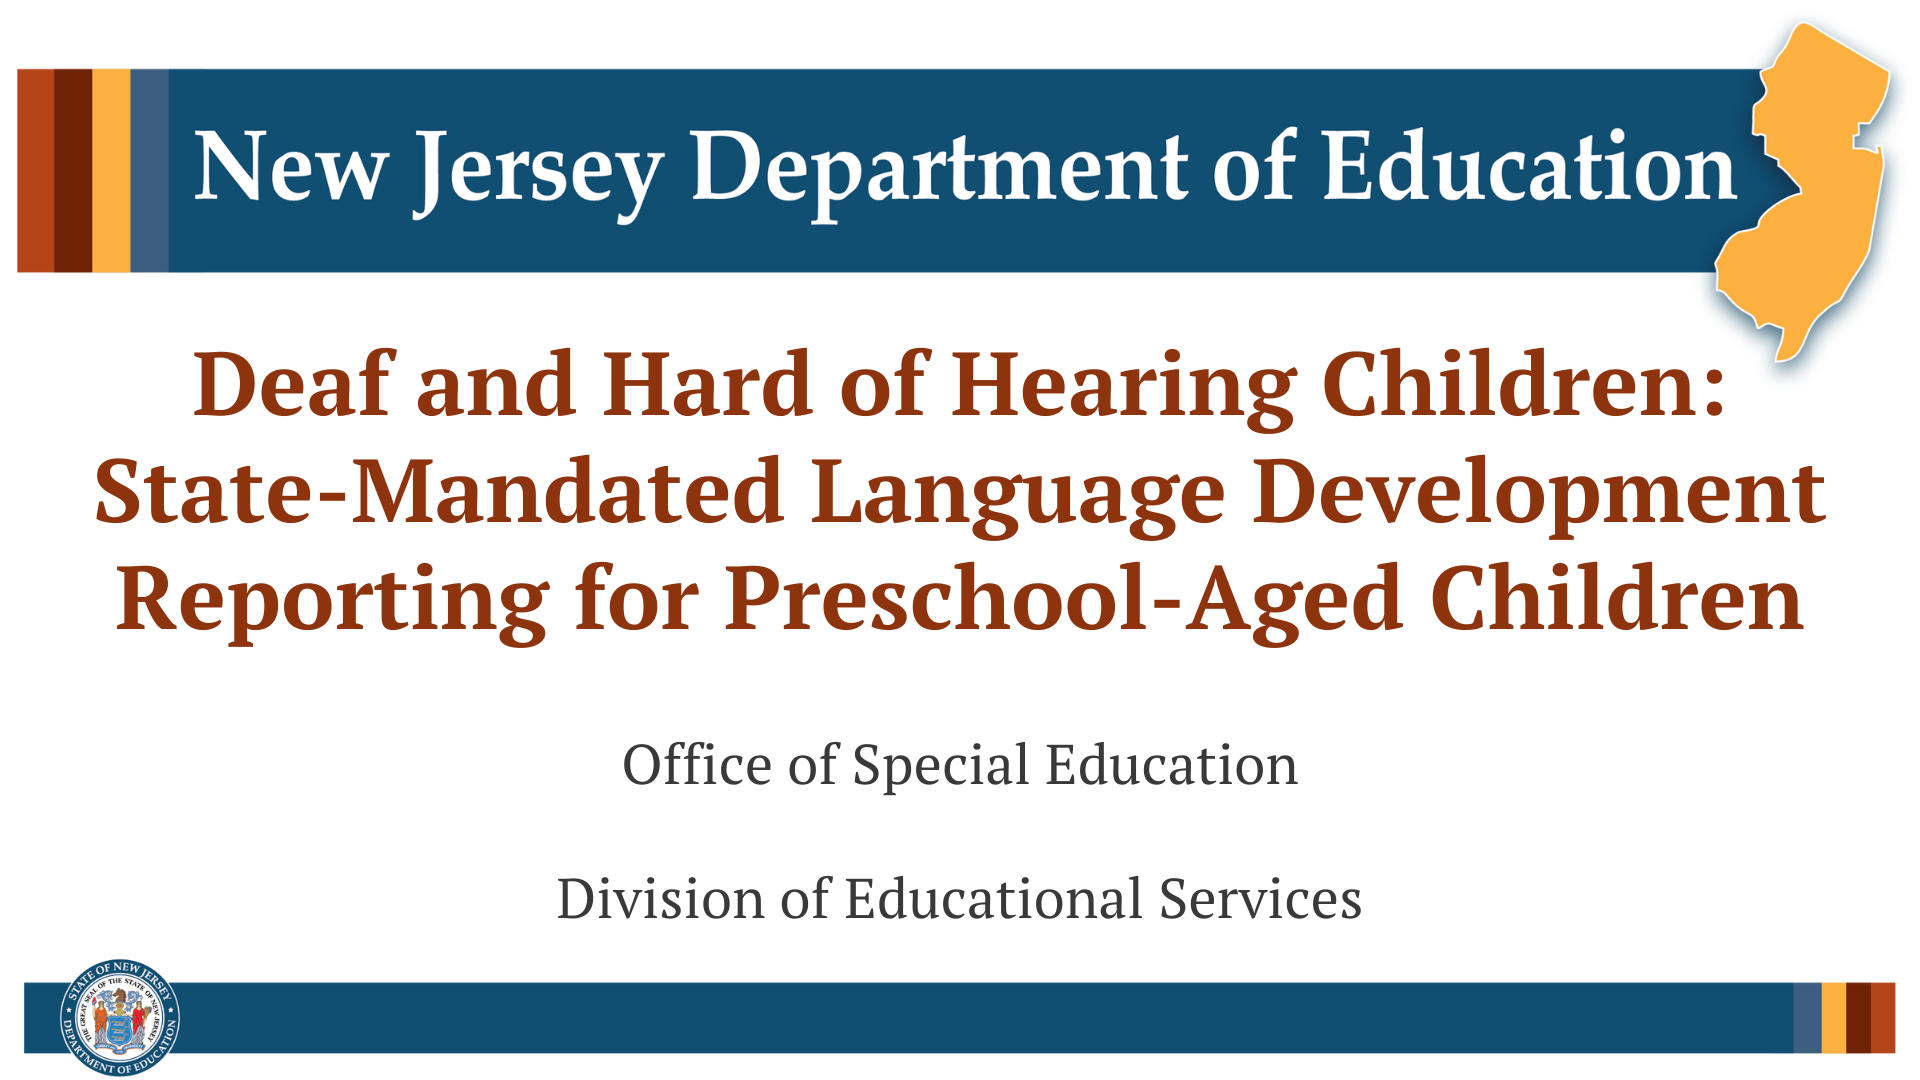 Powerpoint cover page slide with the title of the presentation and an indication that this was developed by the Office of Special Education